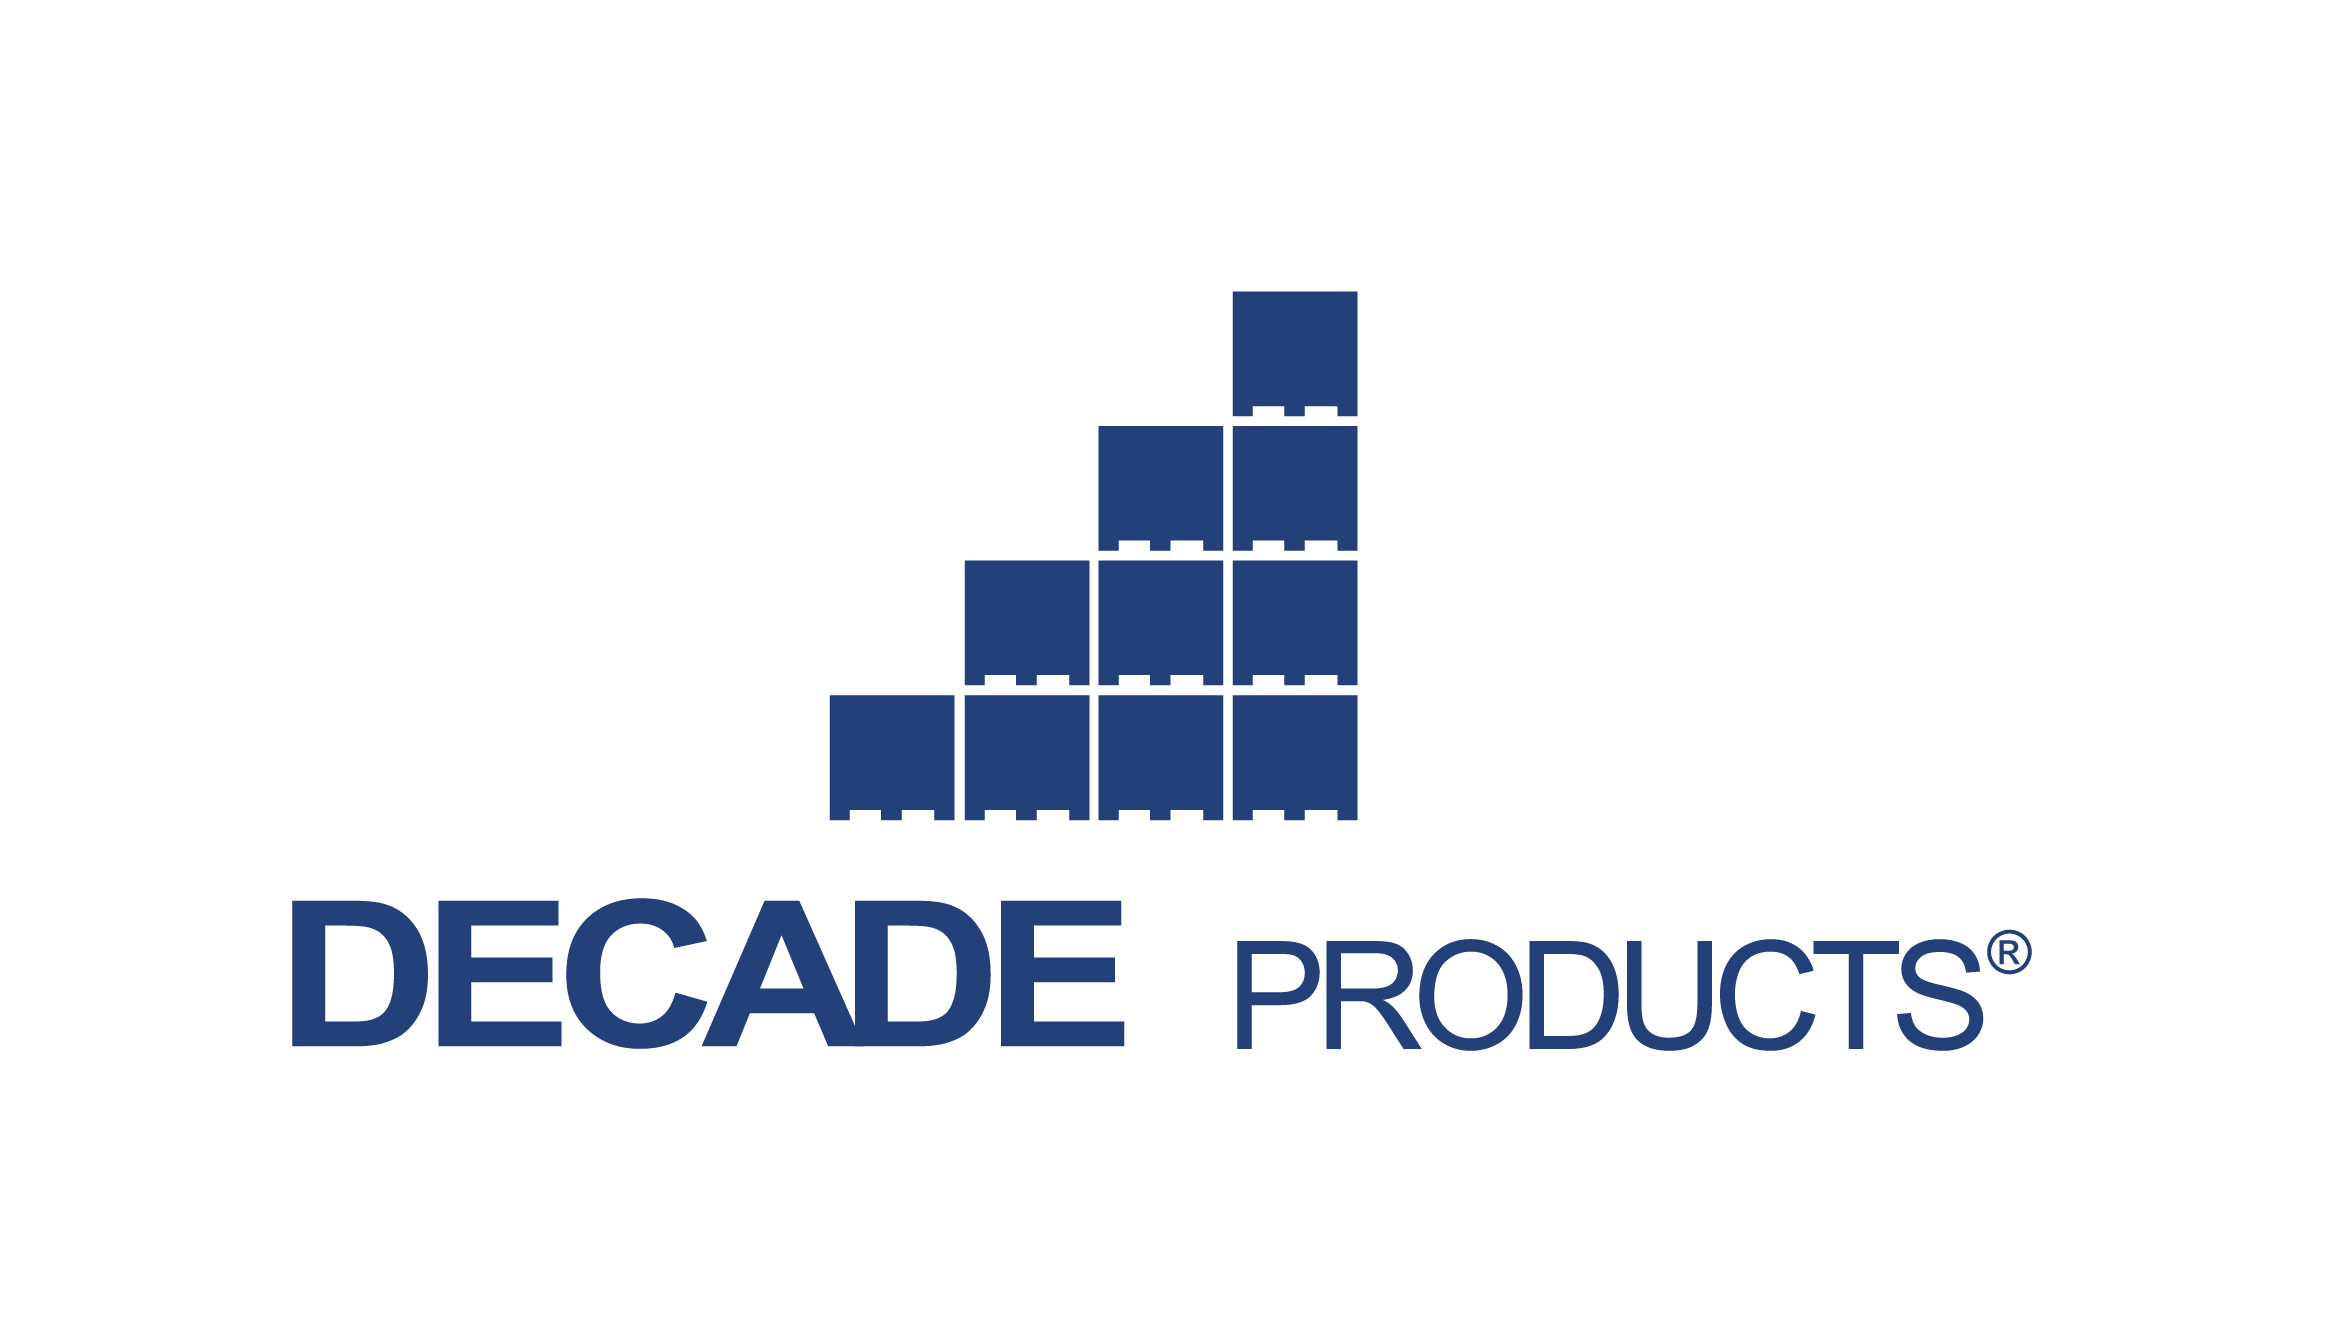 Decade Products